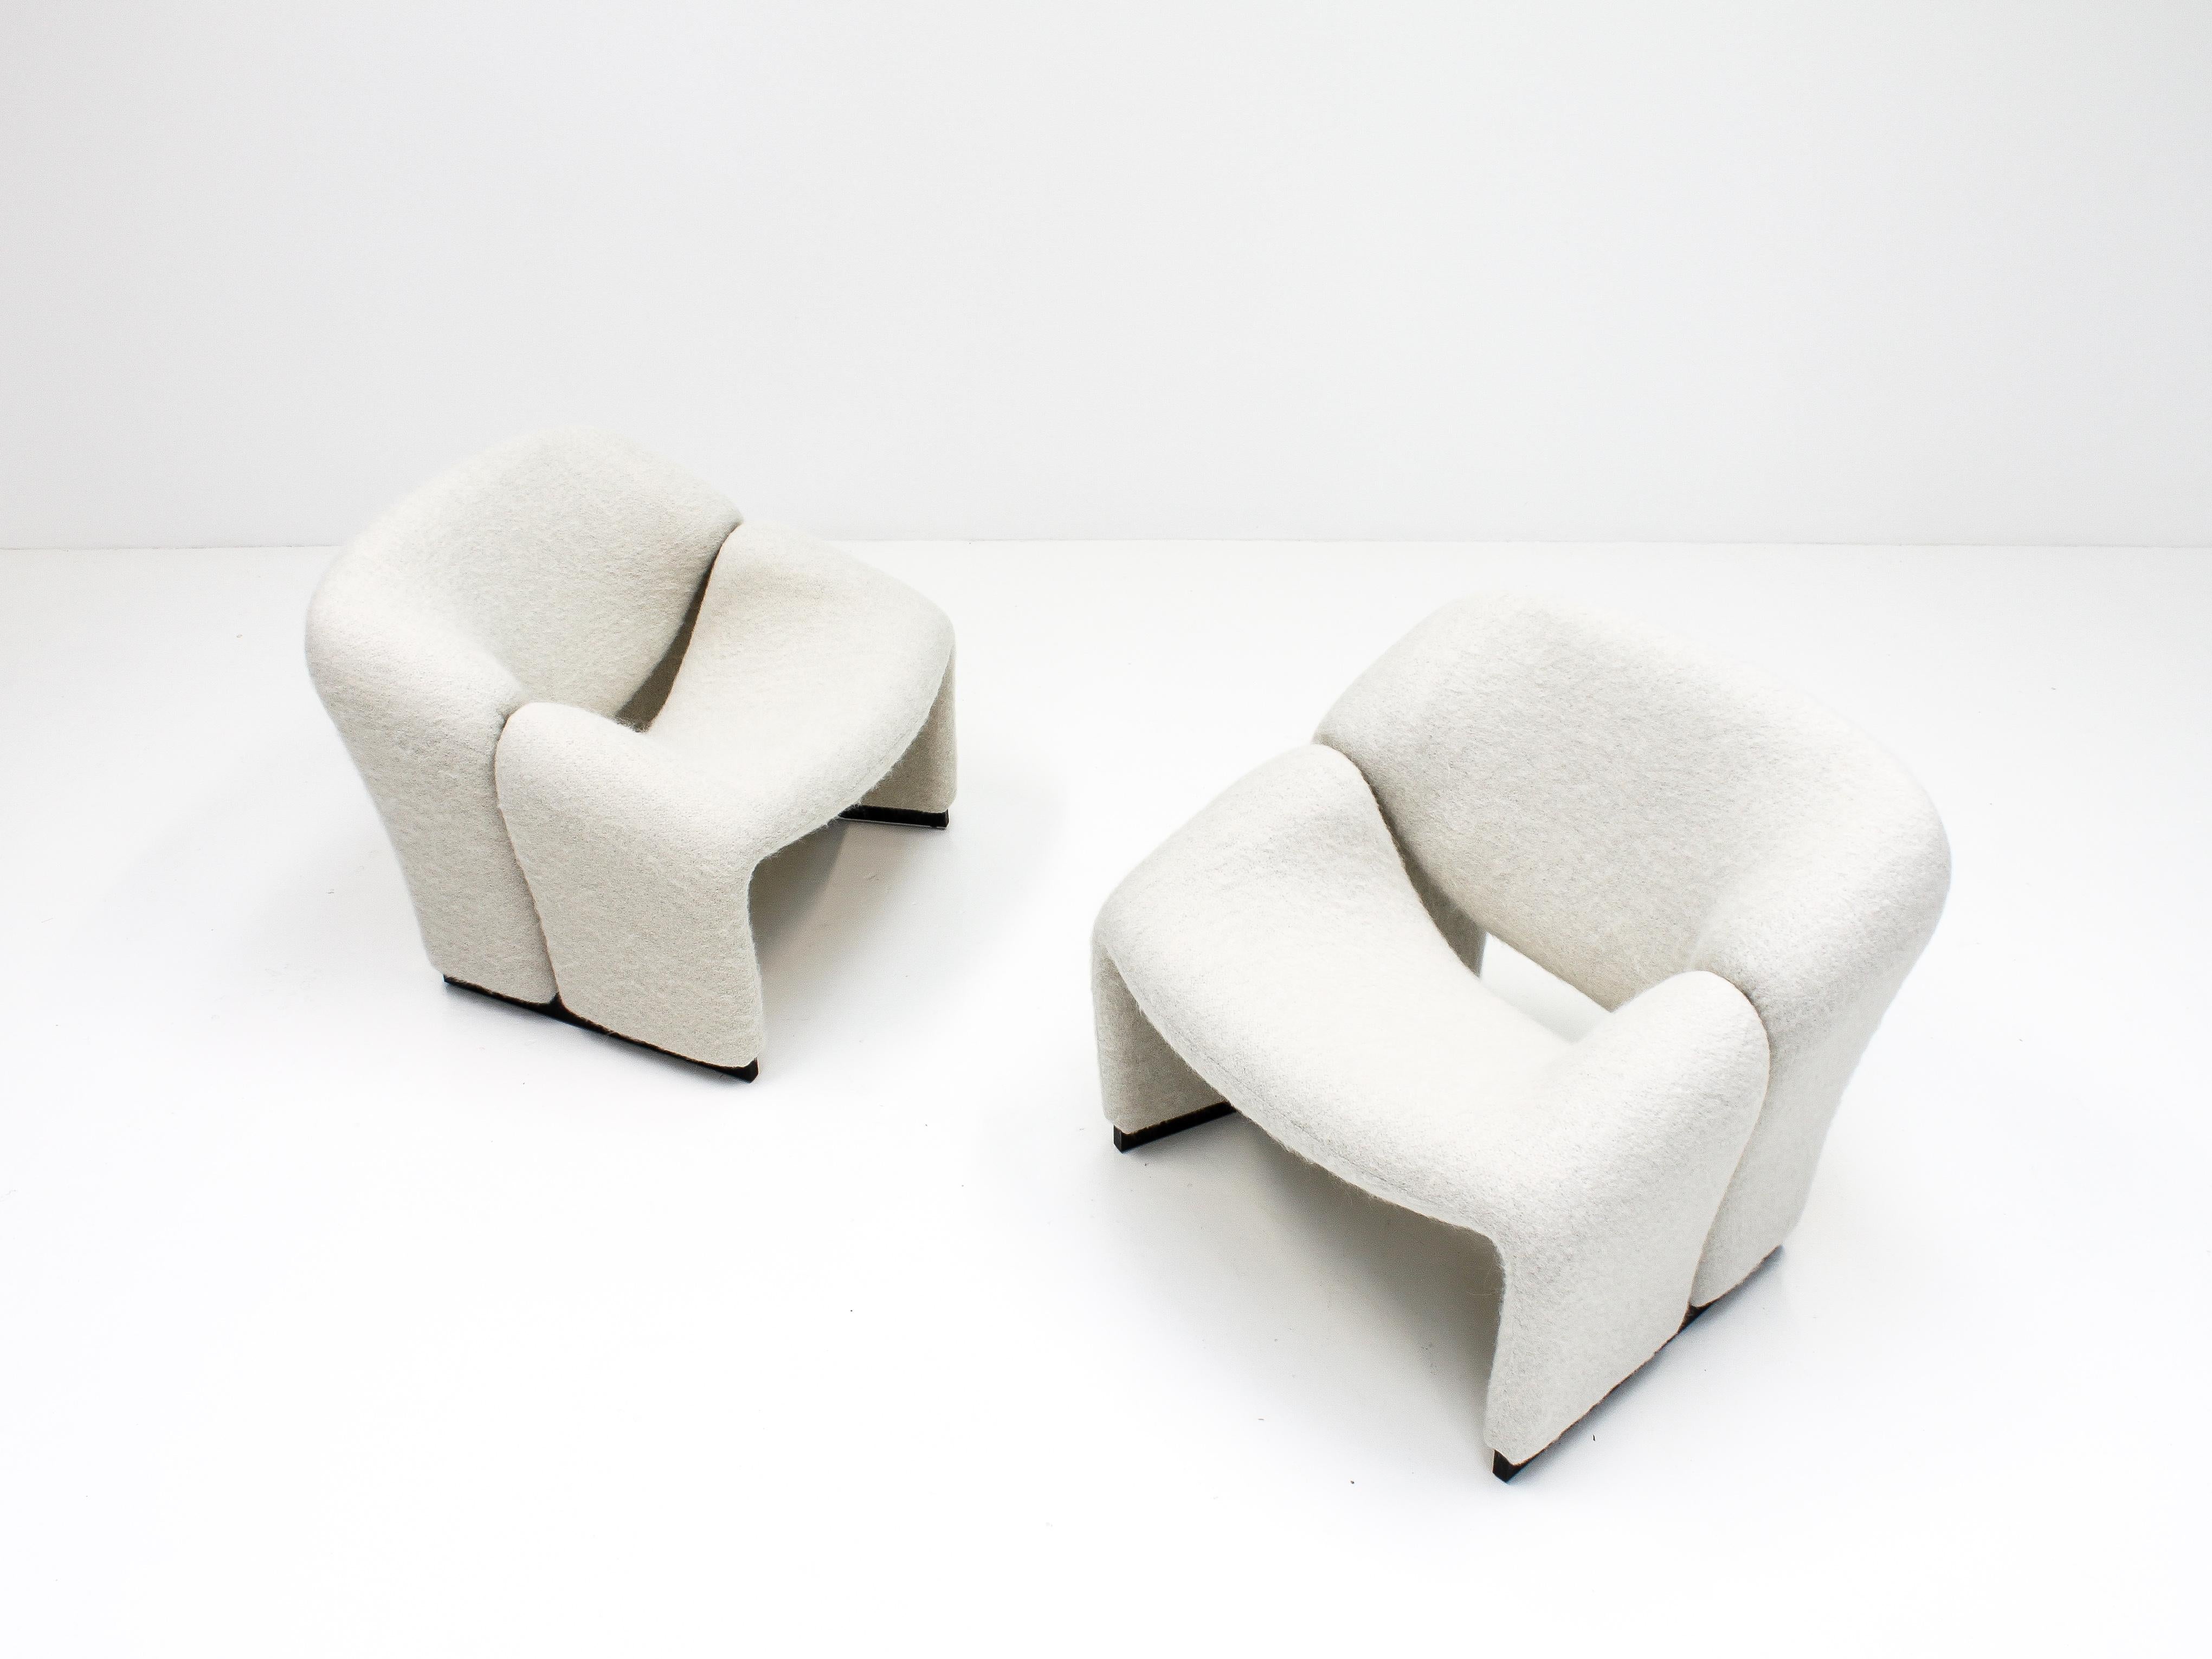 Metal Pair of Pierre Paulin F580 1st Edition Groovy Chairs in Pierre Frey for Artifort